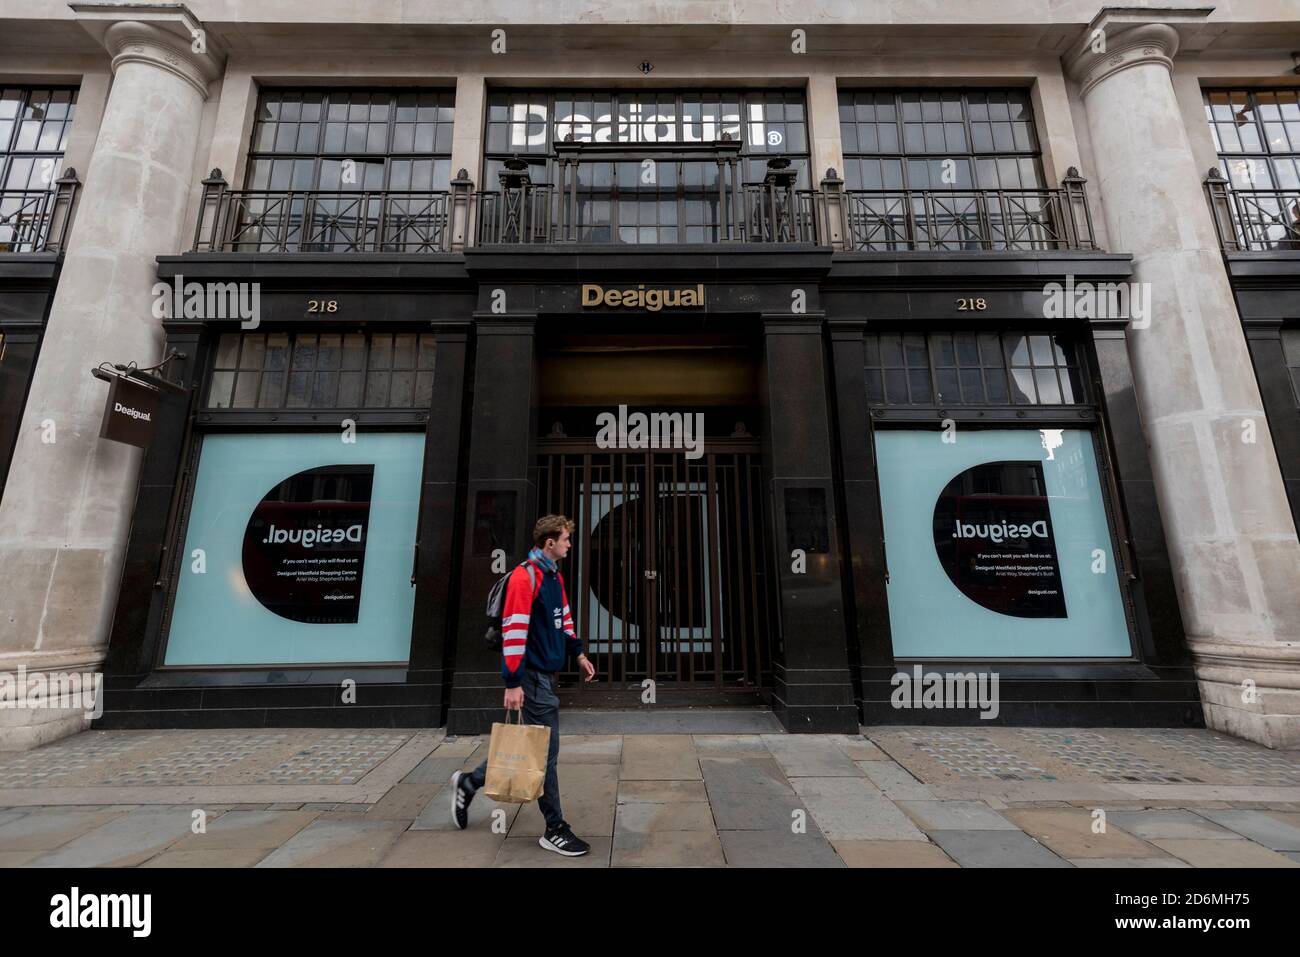 London, UK. 18 October 2020. The Desigual retail property stands empty on  Regent Street. The coronavirus pandemic has had a negative impact on  customer footfall resulting in several retail owners to permanently